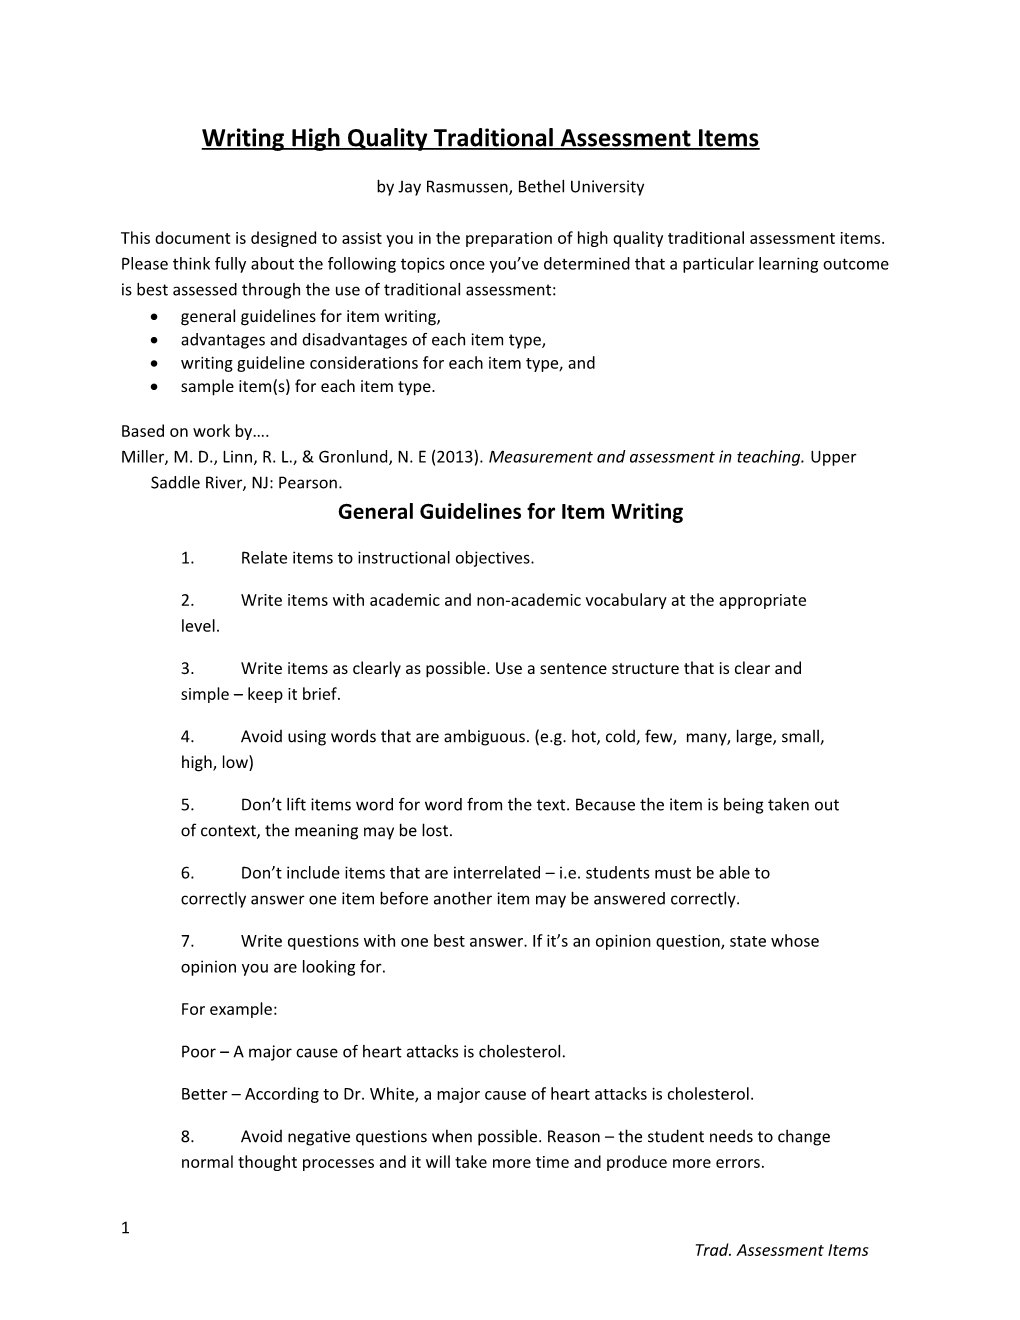 Writing High Quality Traditional Assessment Items